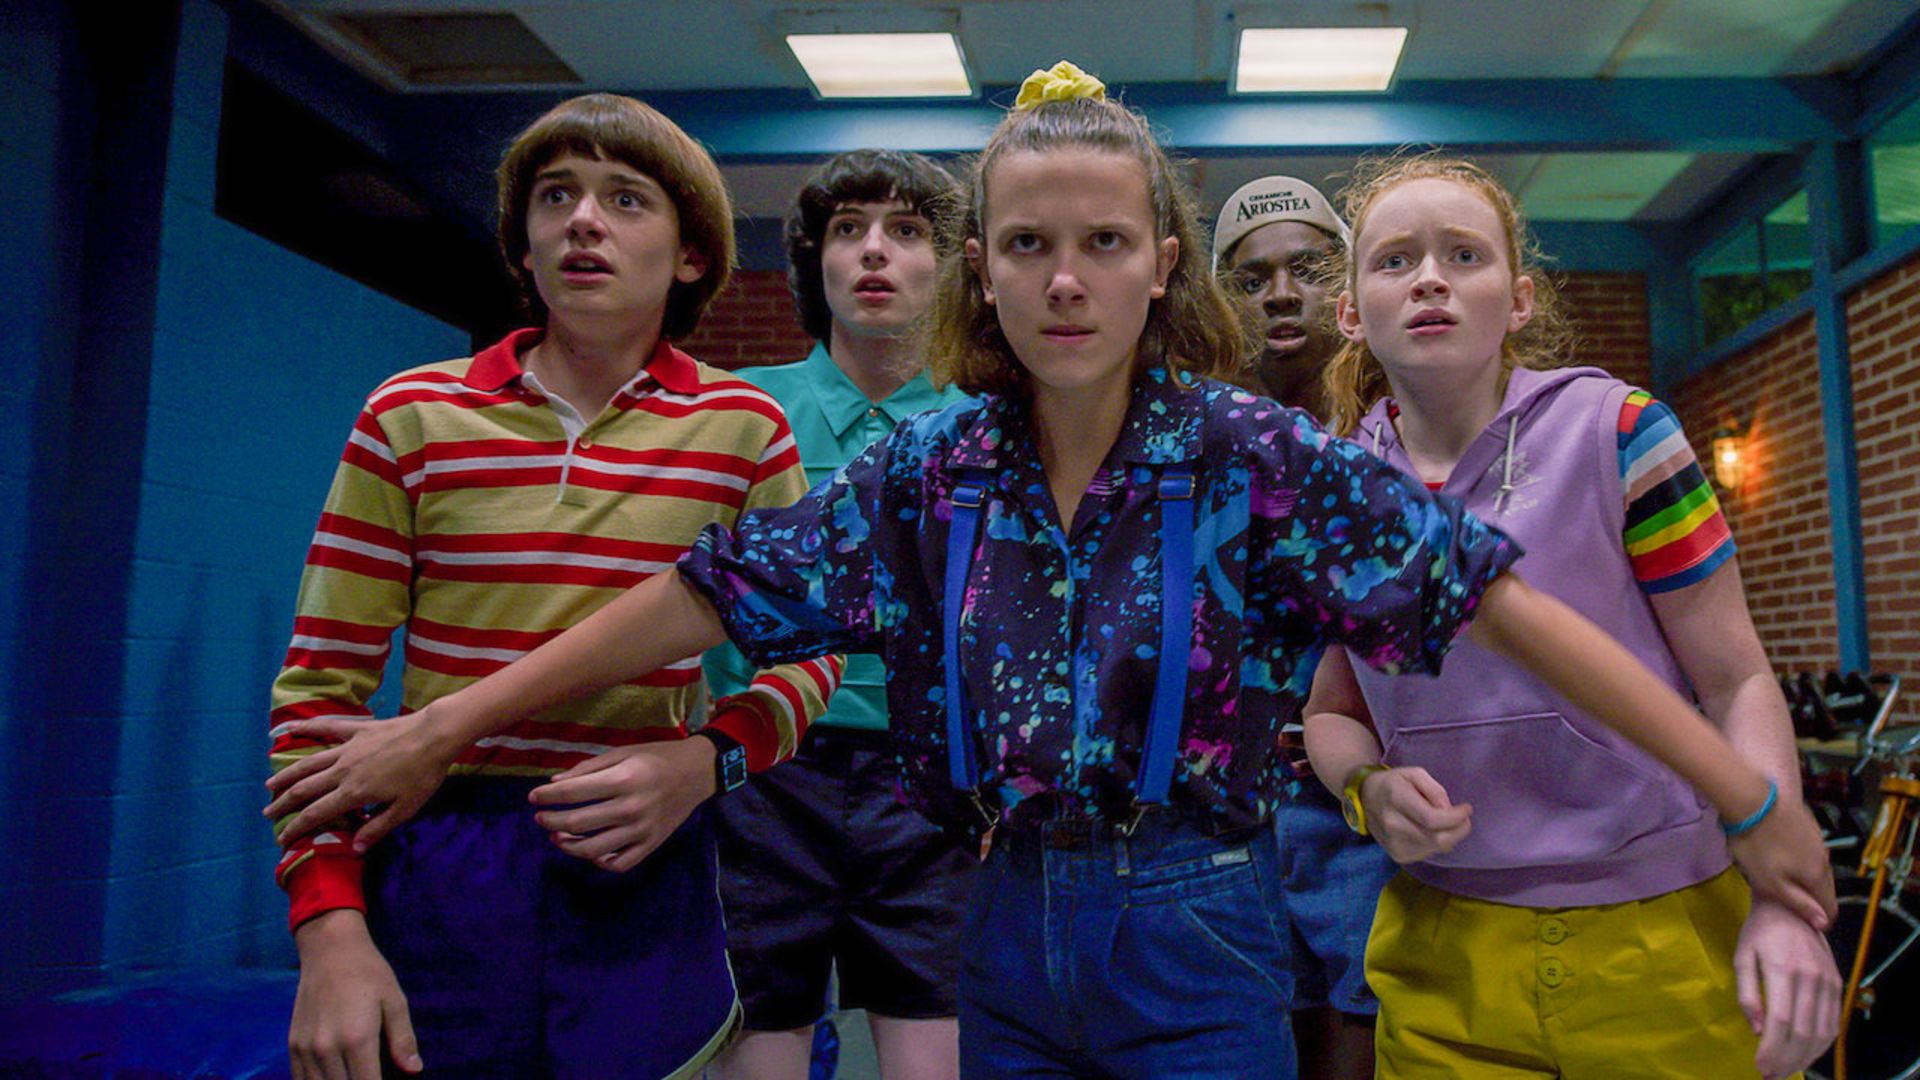 Stranger Things recap video sees the Netflix show’s stars catch forgetful fans up ahead of season 4